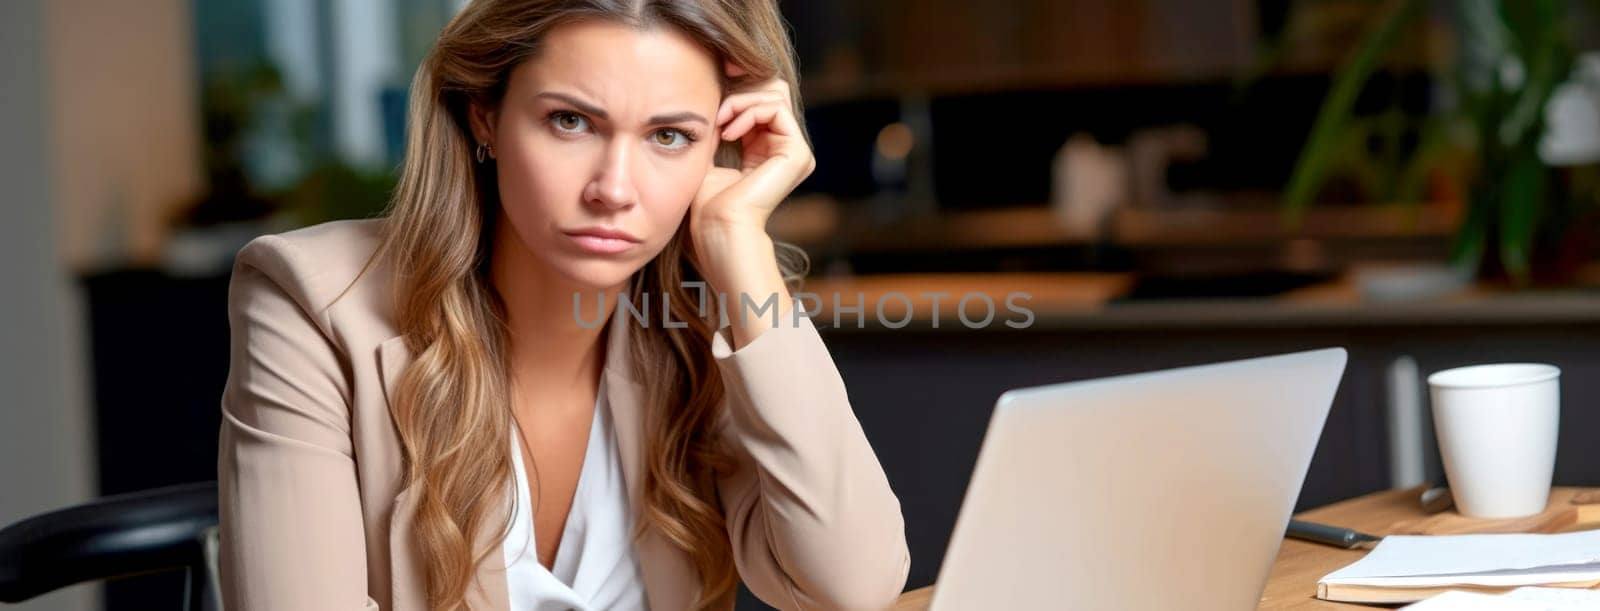 Worried businesswoman working on a laptop in an office setting